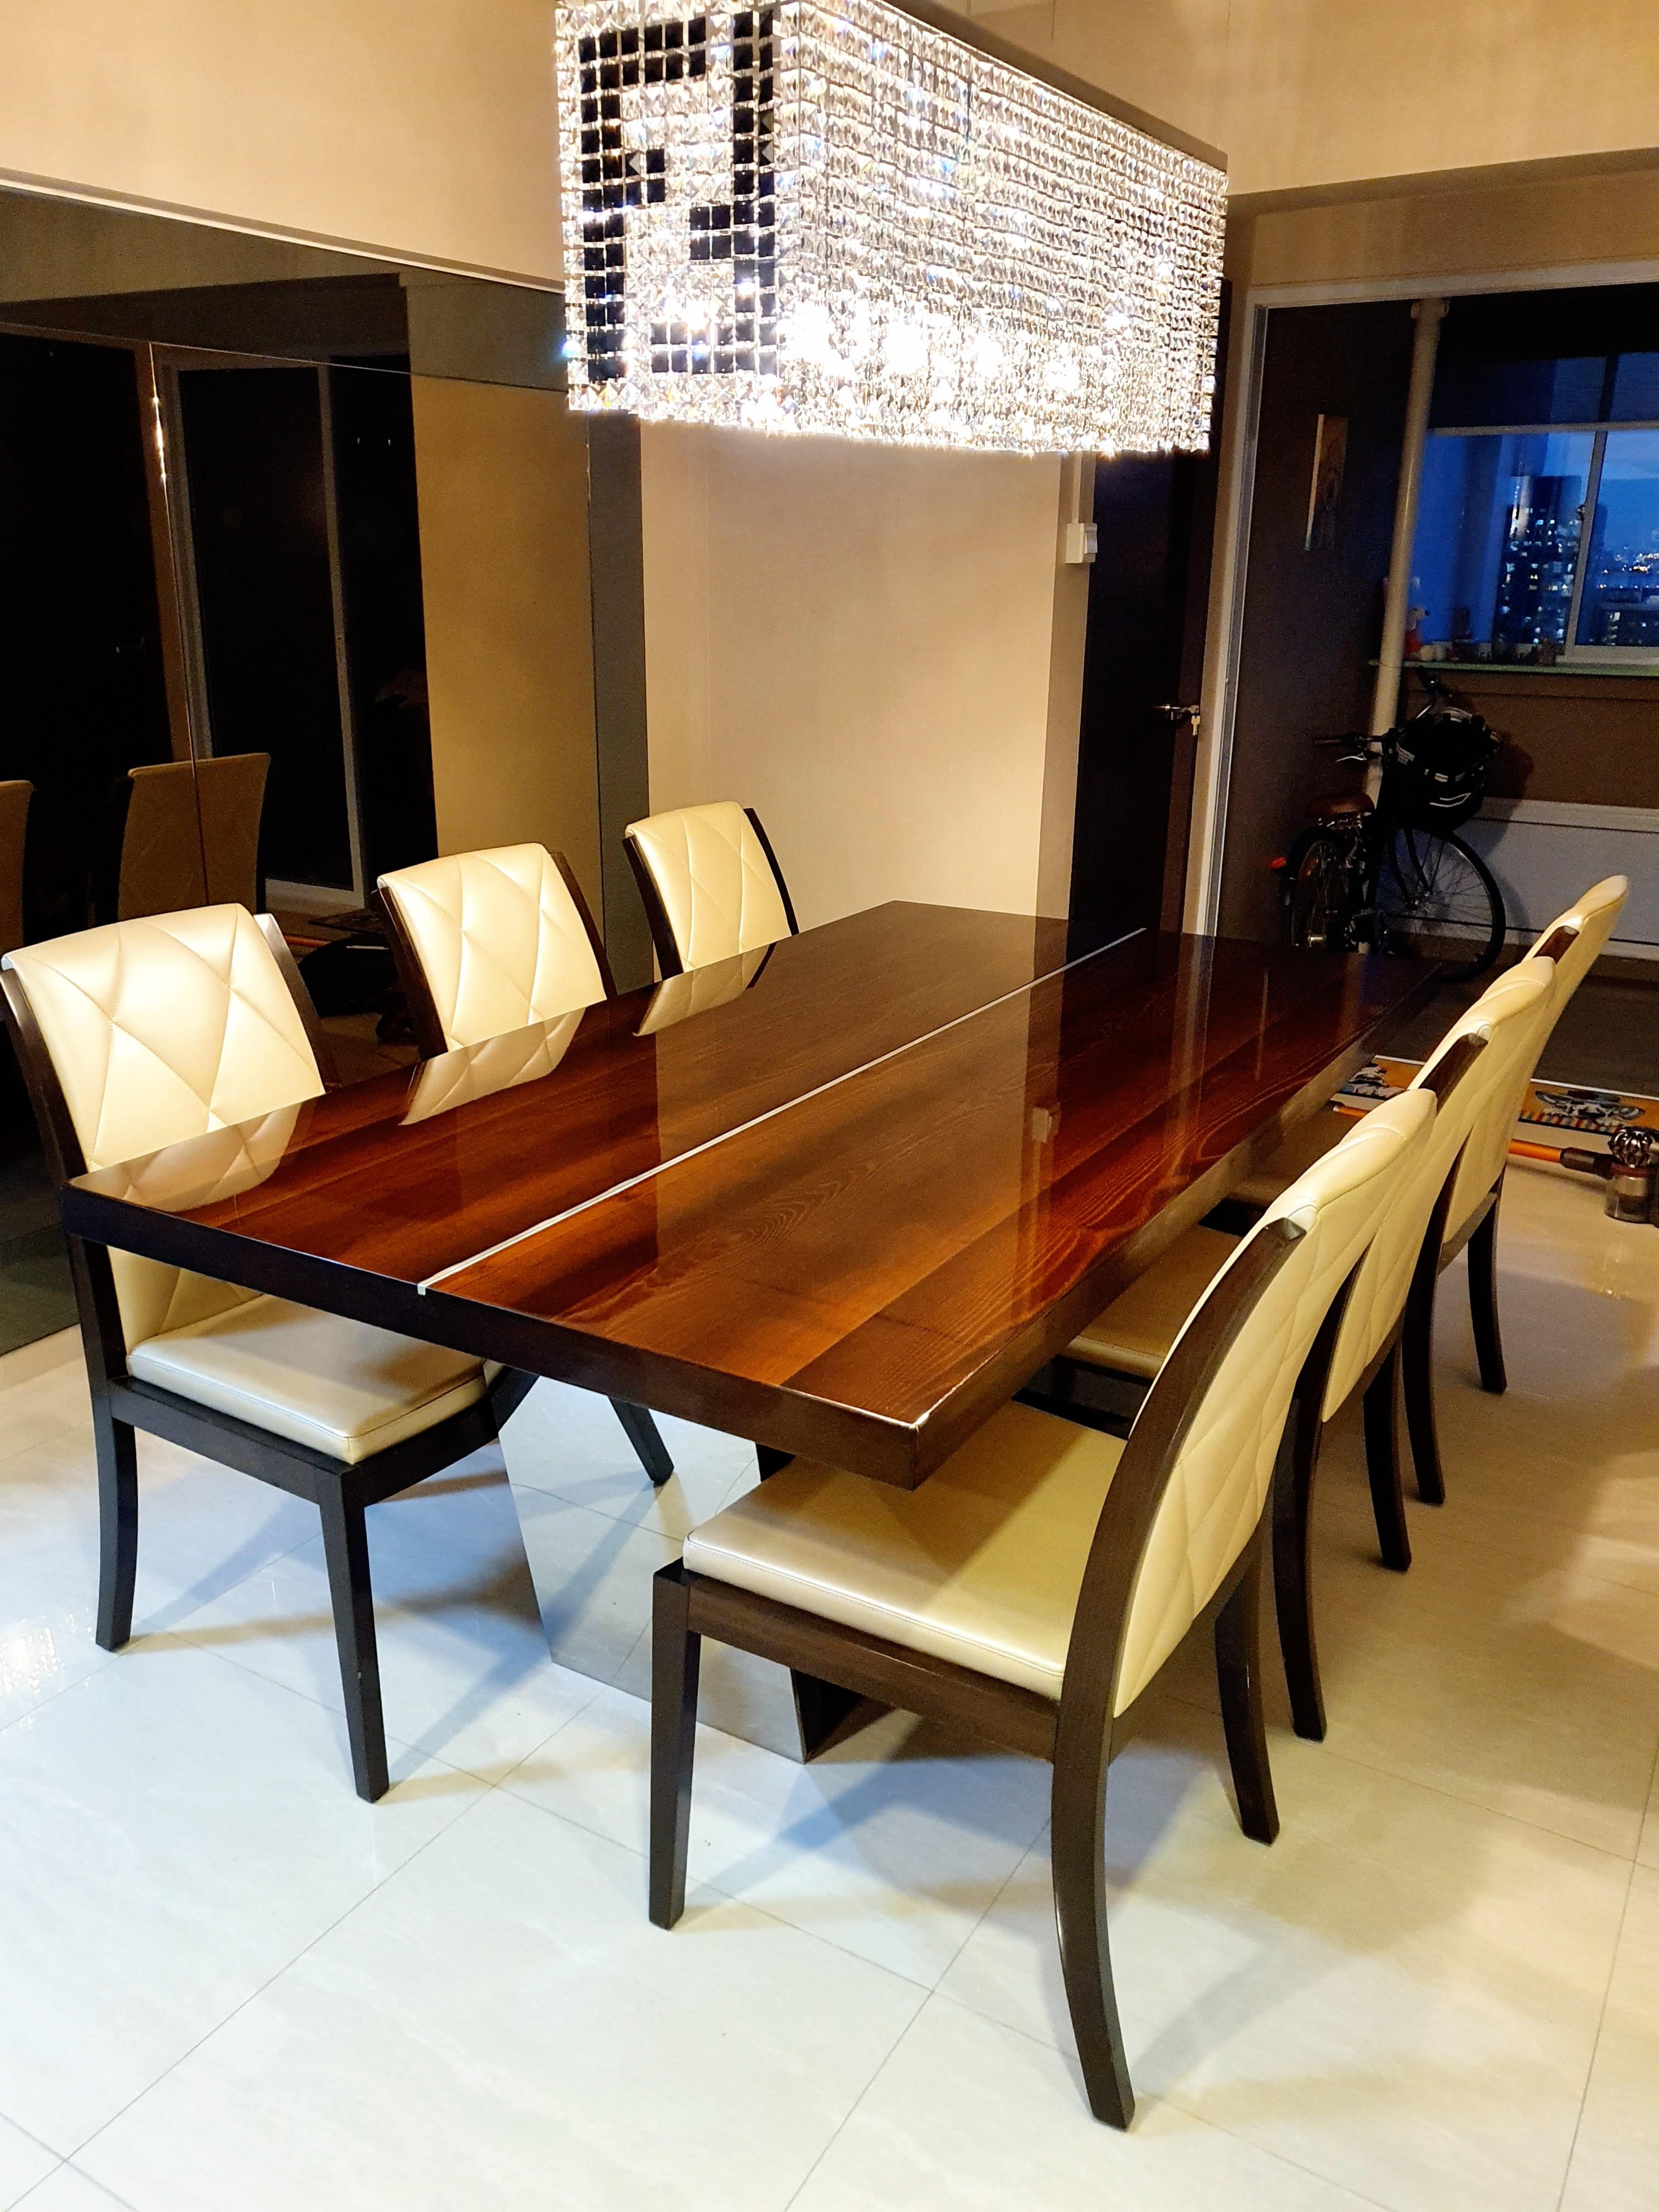 Malerba Premiun Italian Dining Table Set 6 8 Seater Leather Chairs Furniture Tables Chairs On Carousell